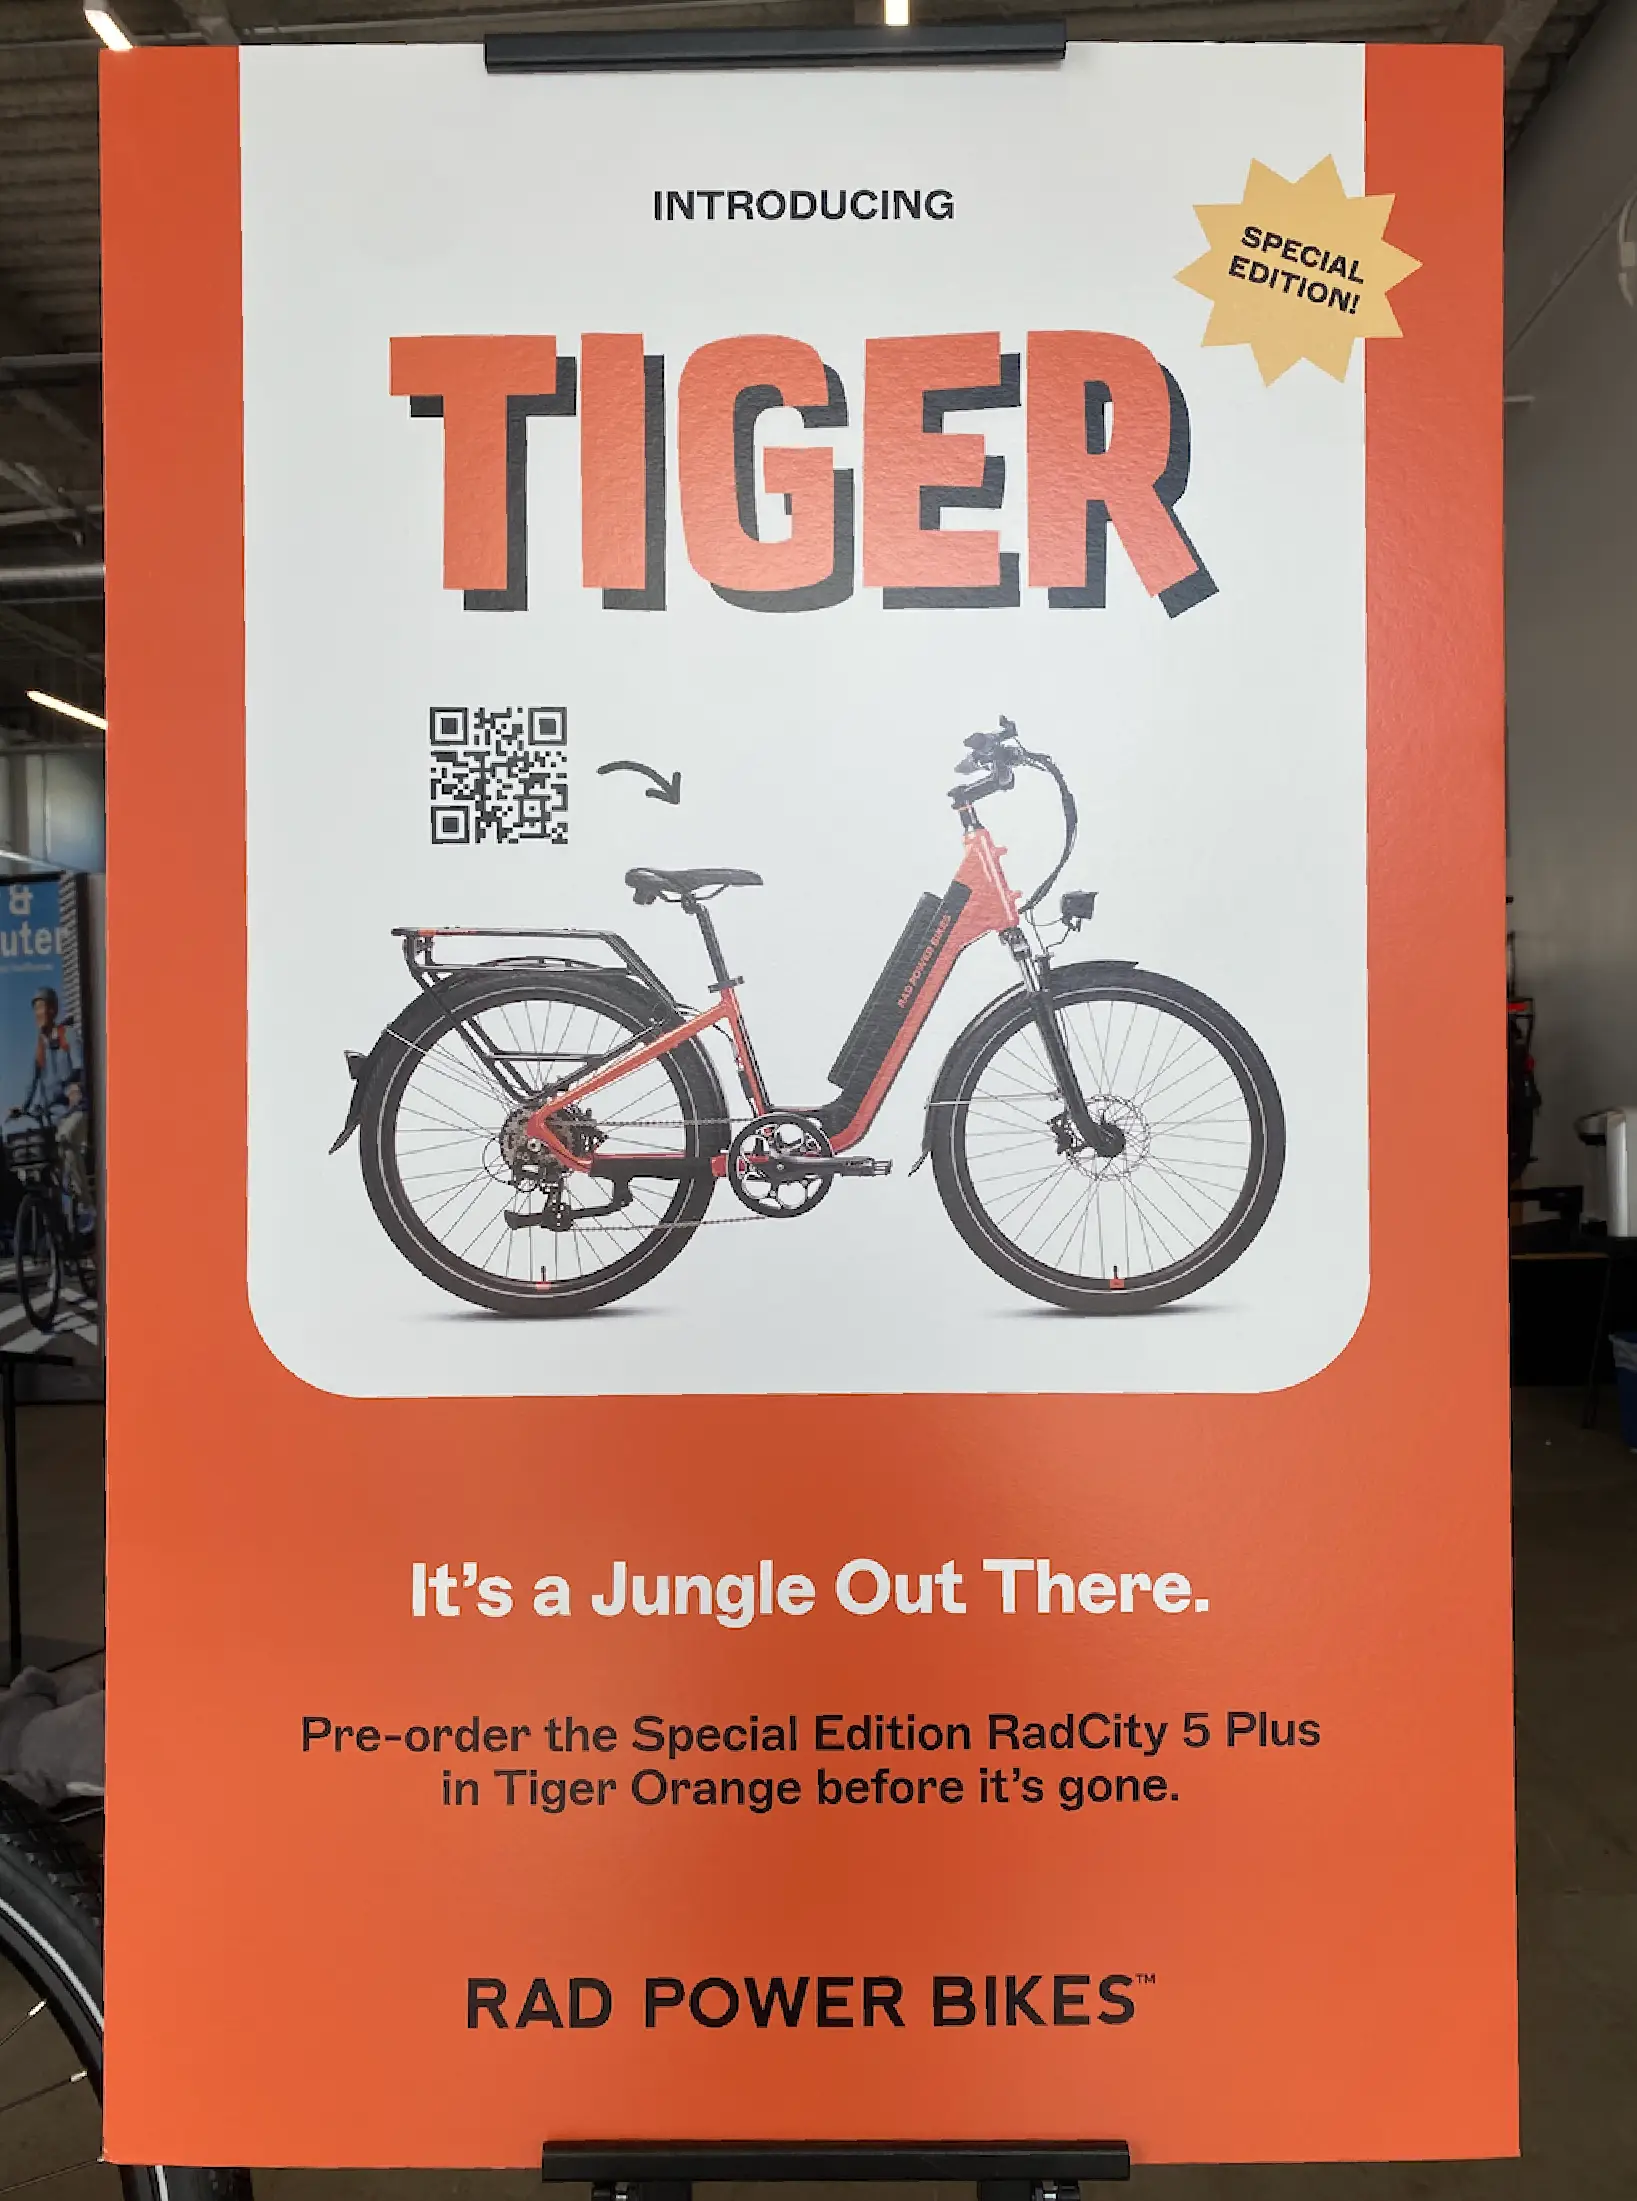 In-store poster at Rad Power Bikes promoting its Tiger Orange e-bike pre-order with a QR Code.